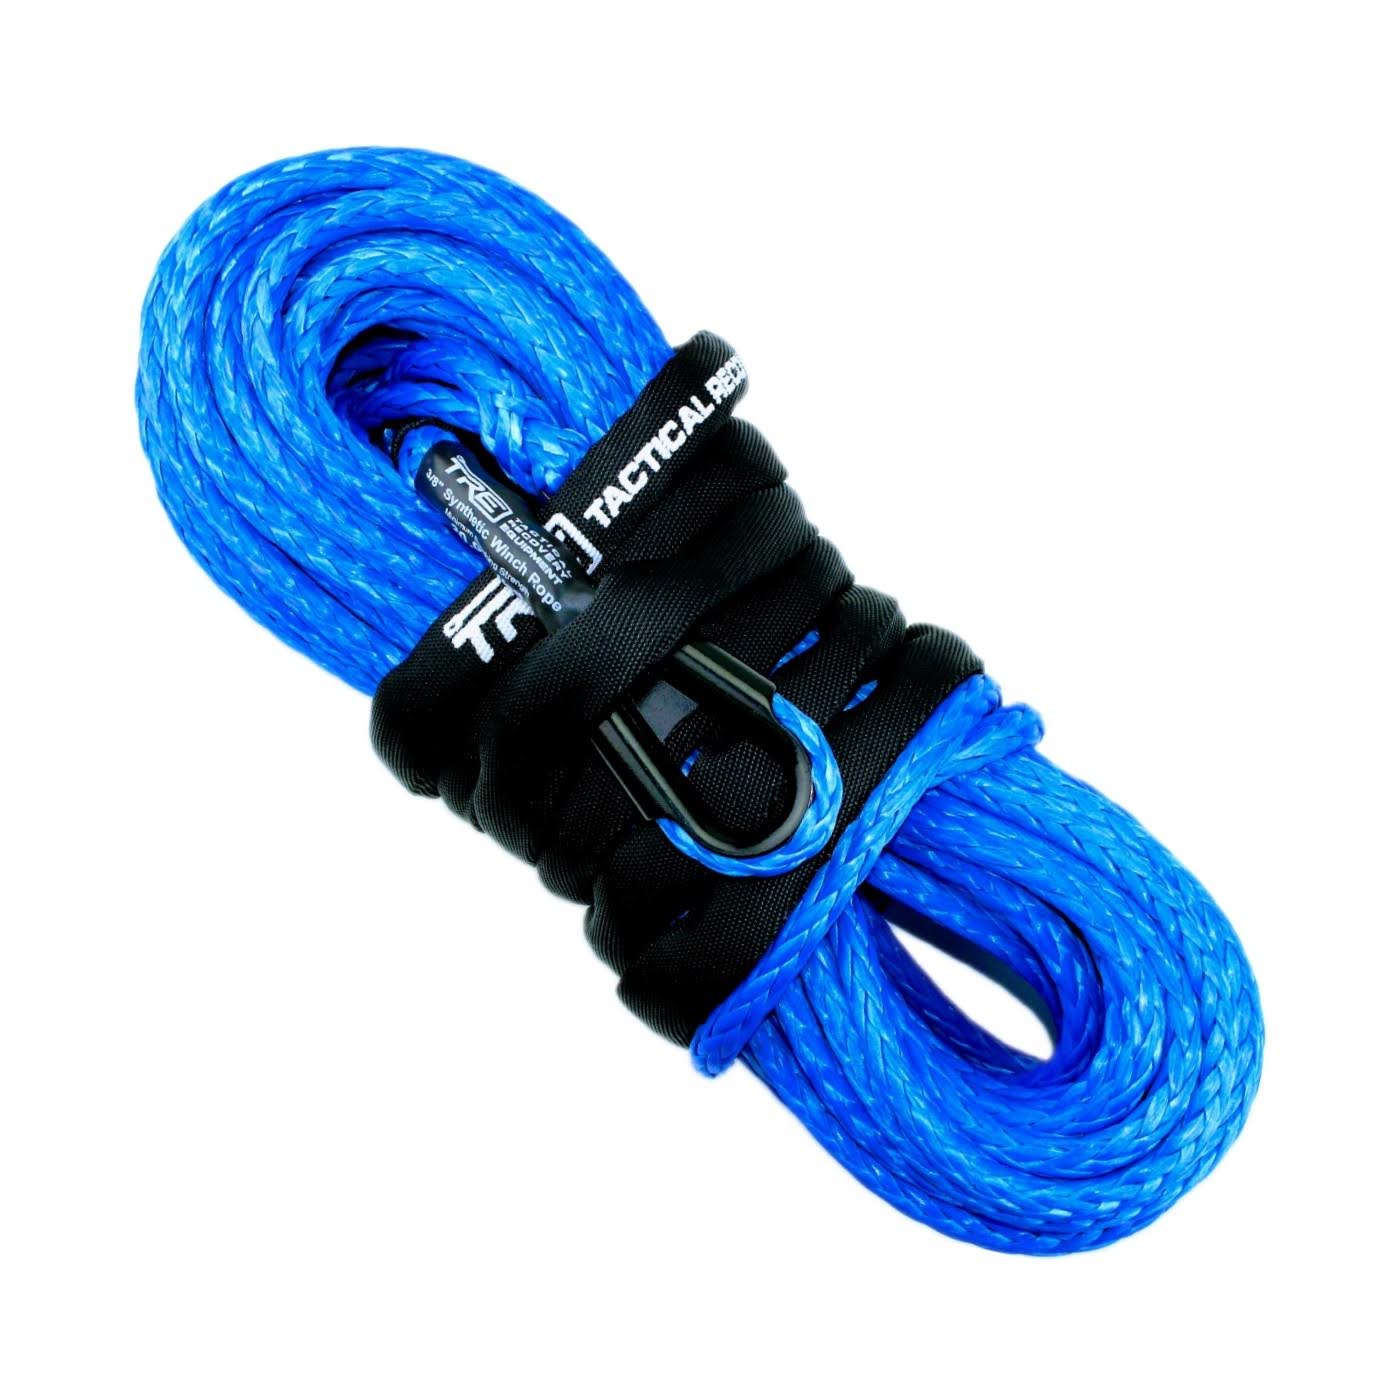 Trailer Winch Rope High Strength Spectra